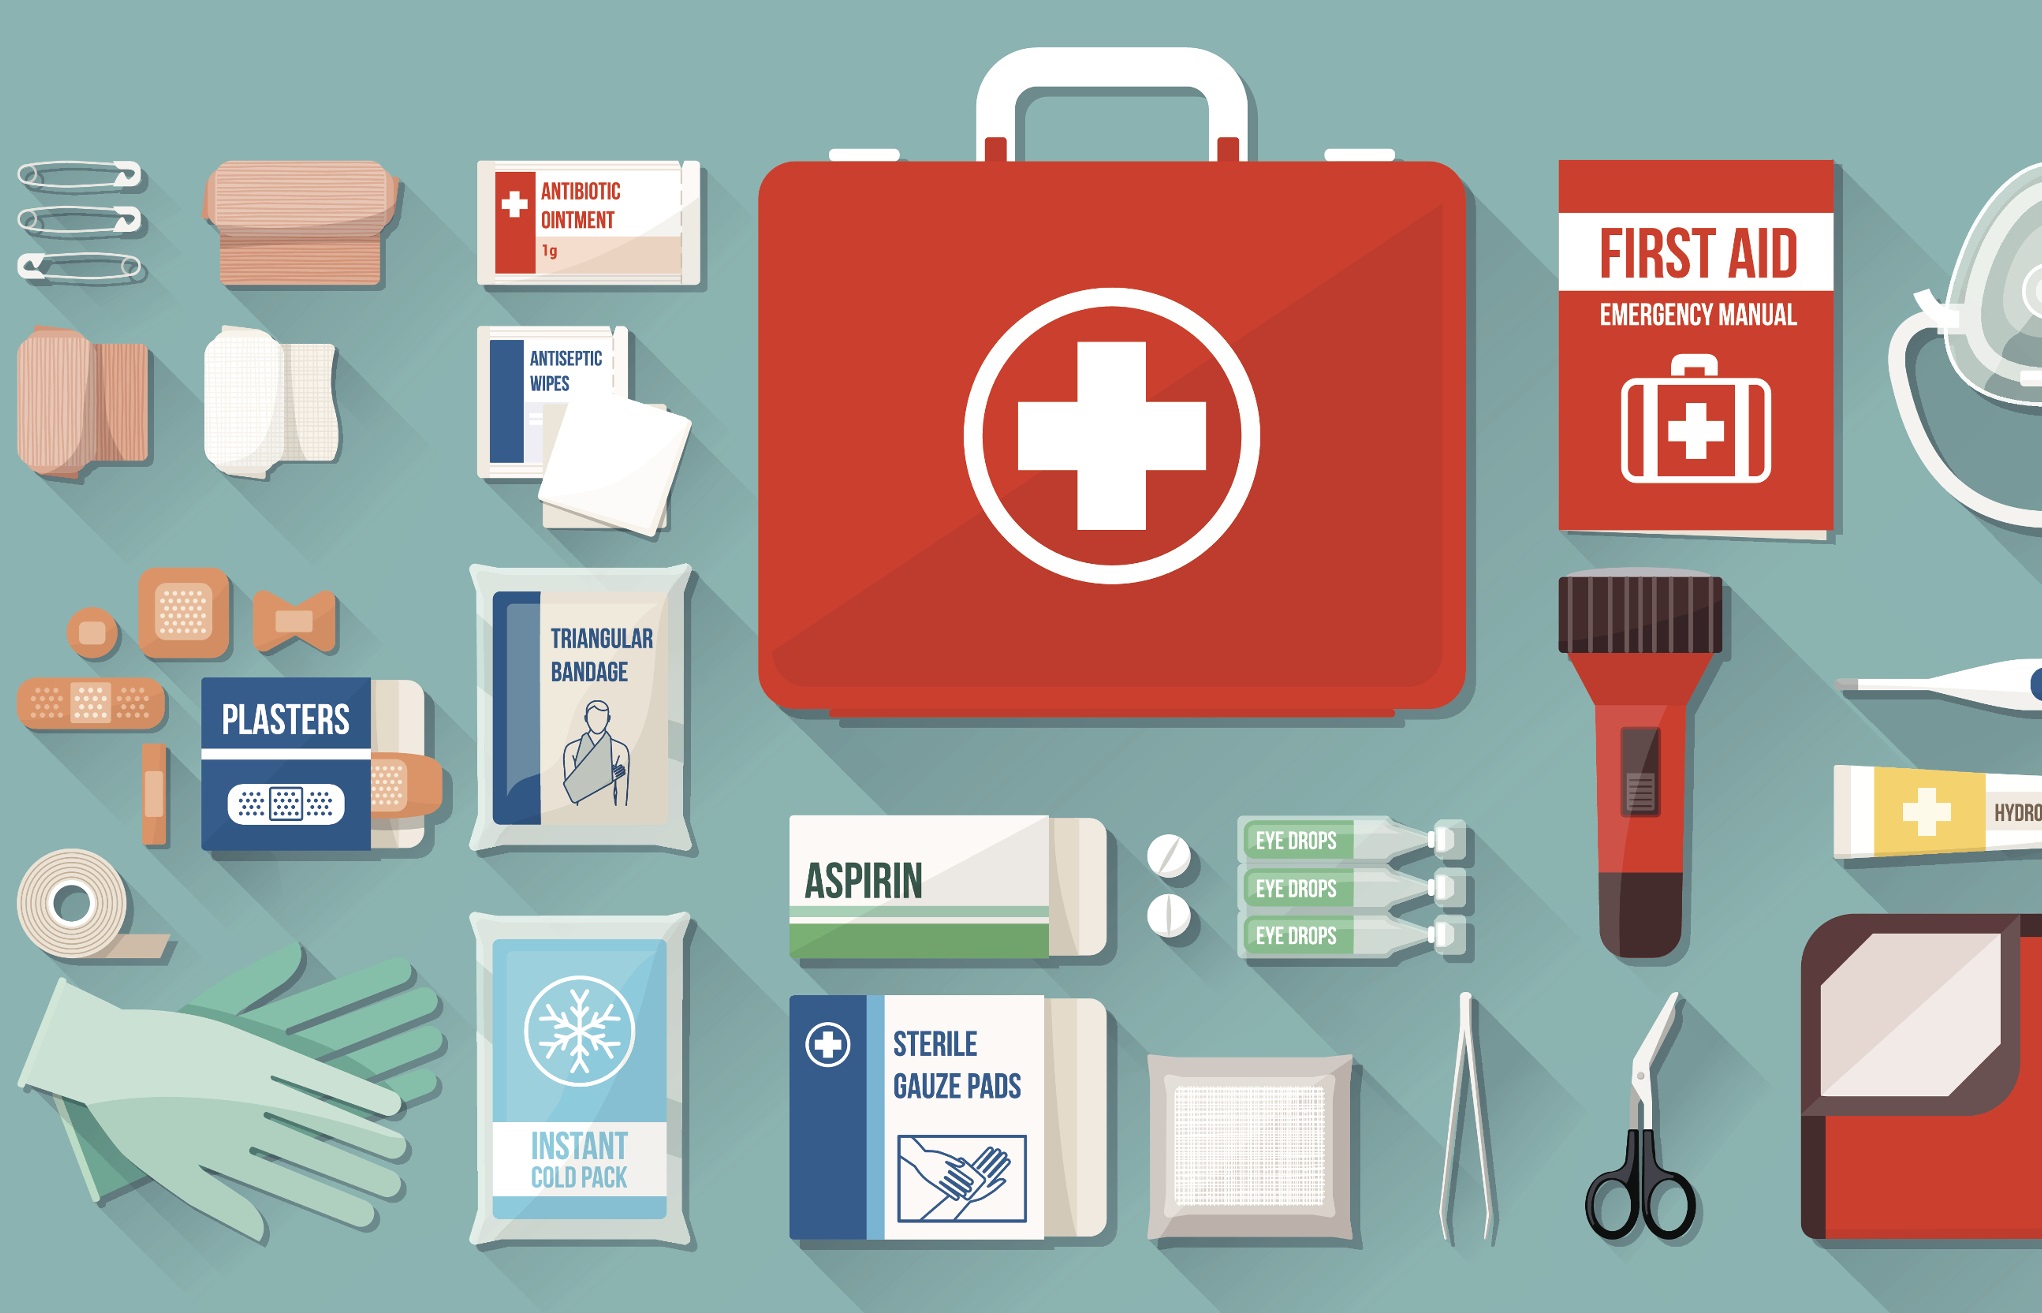 first aid kit recommendations